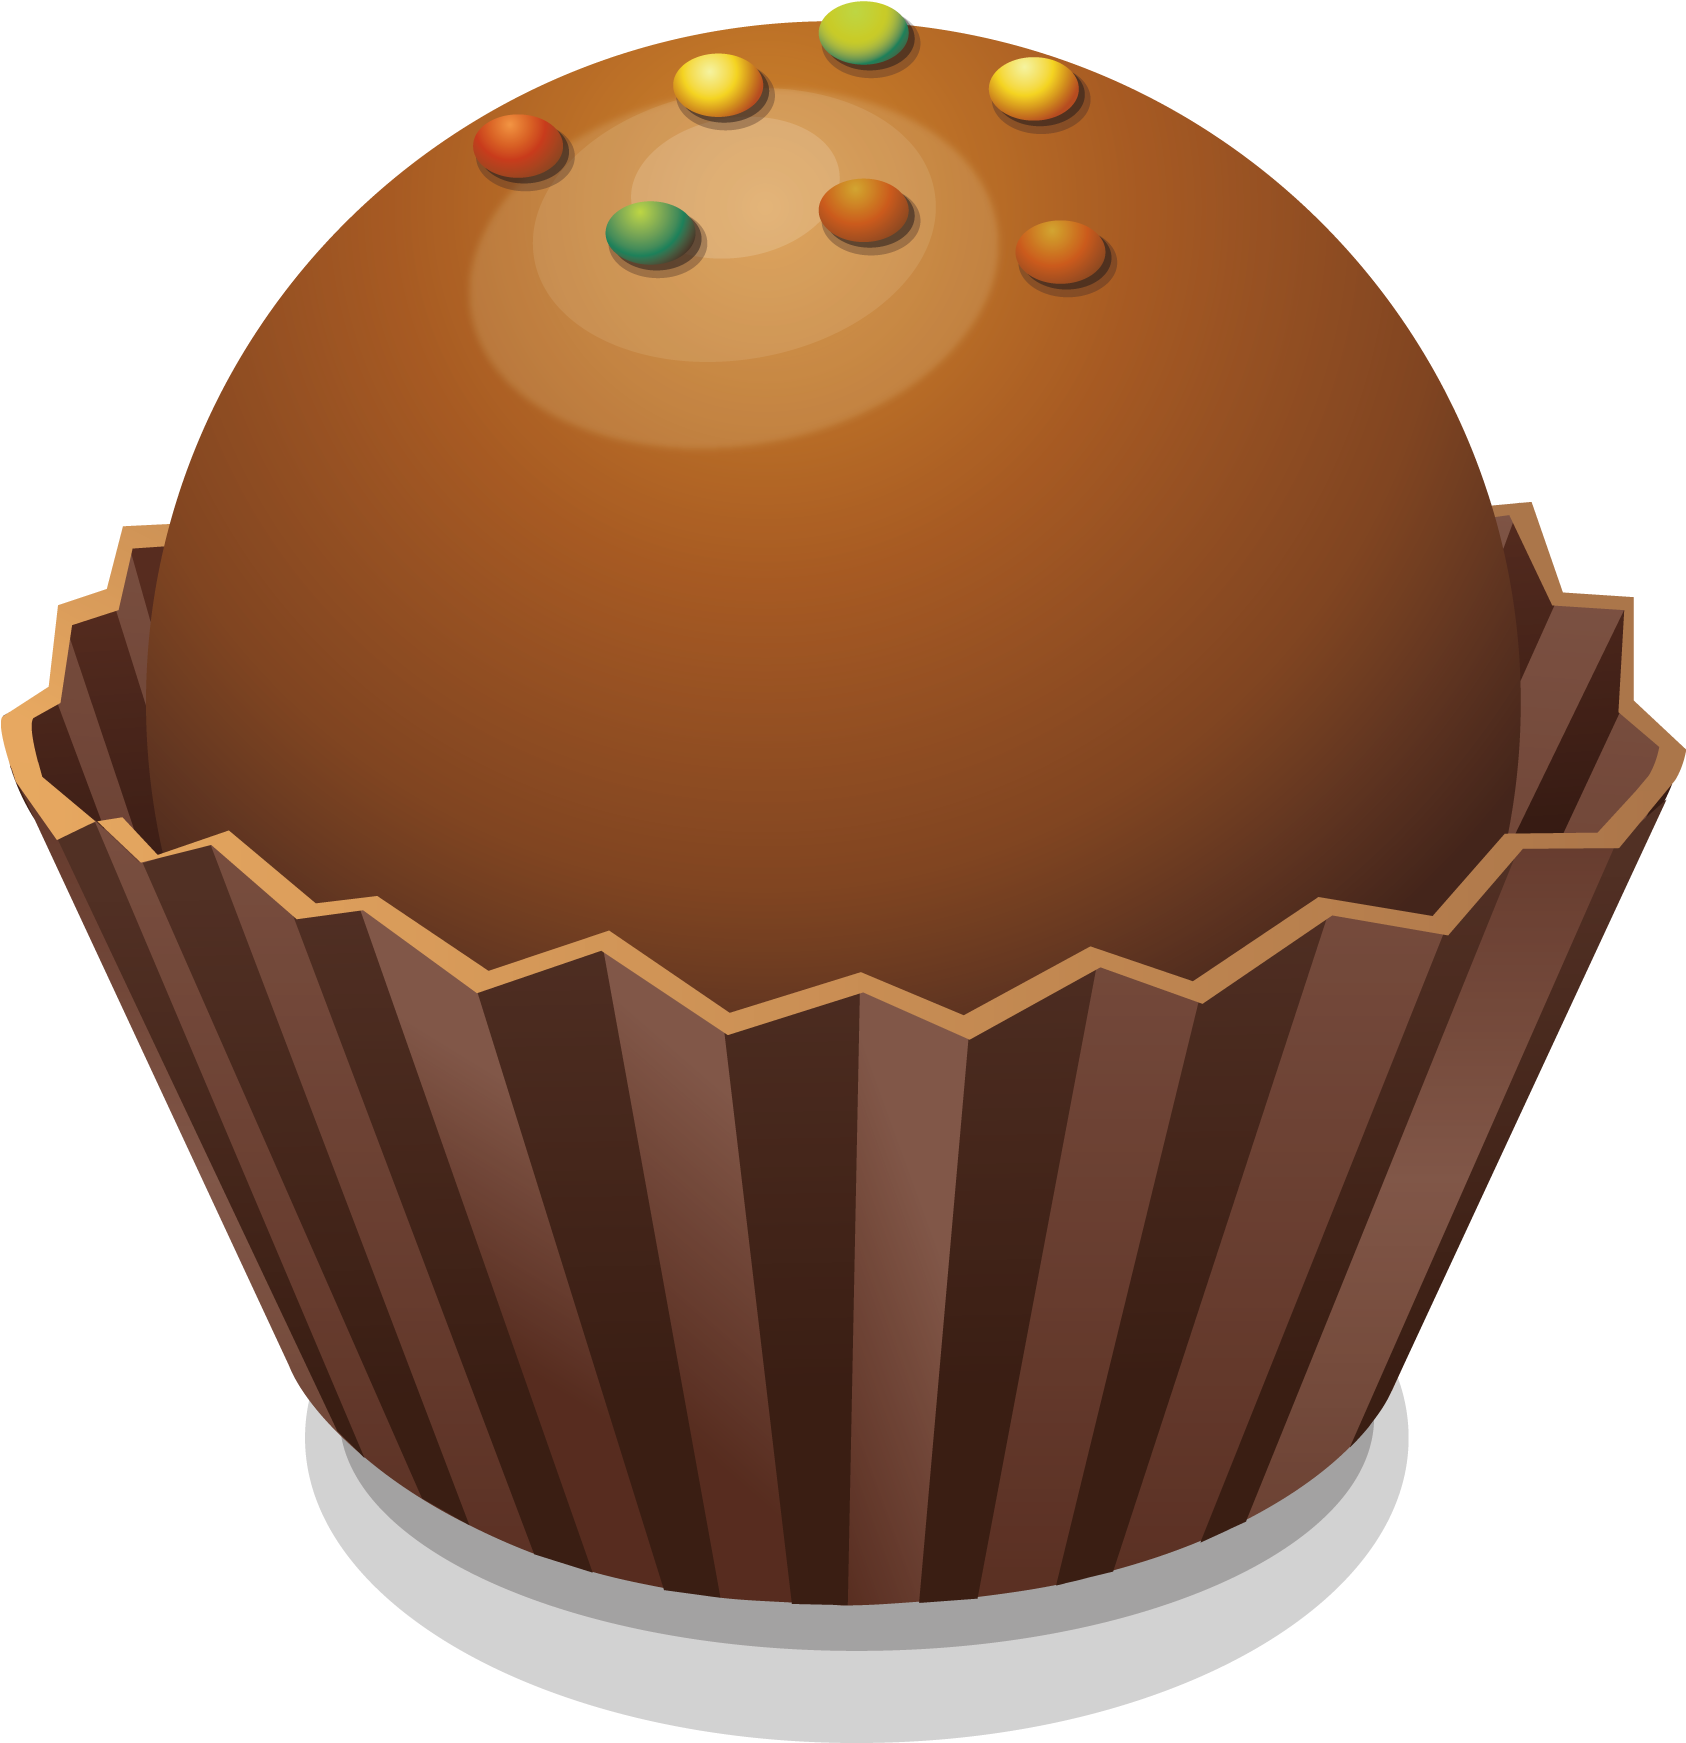 muffins clipart brown food